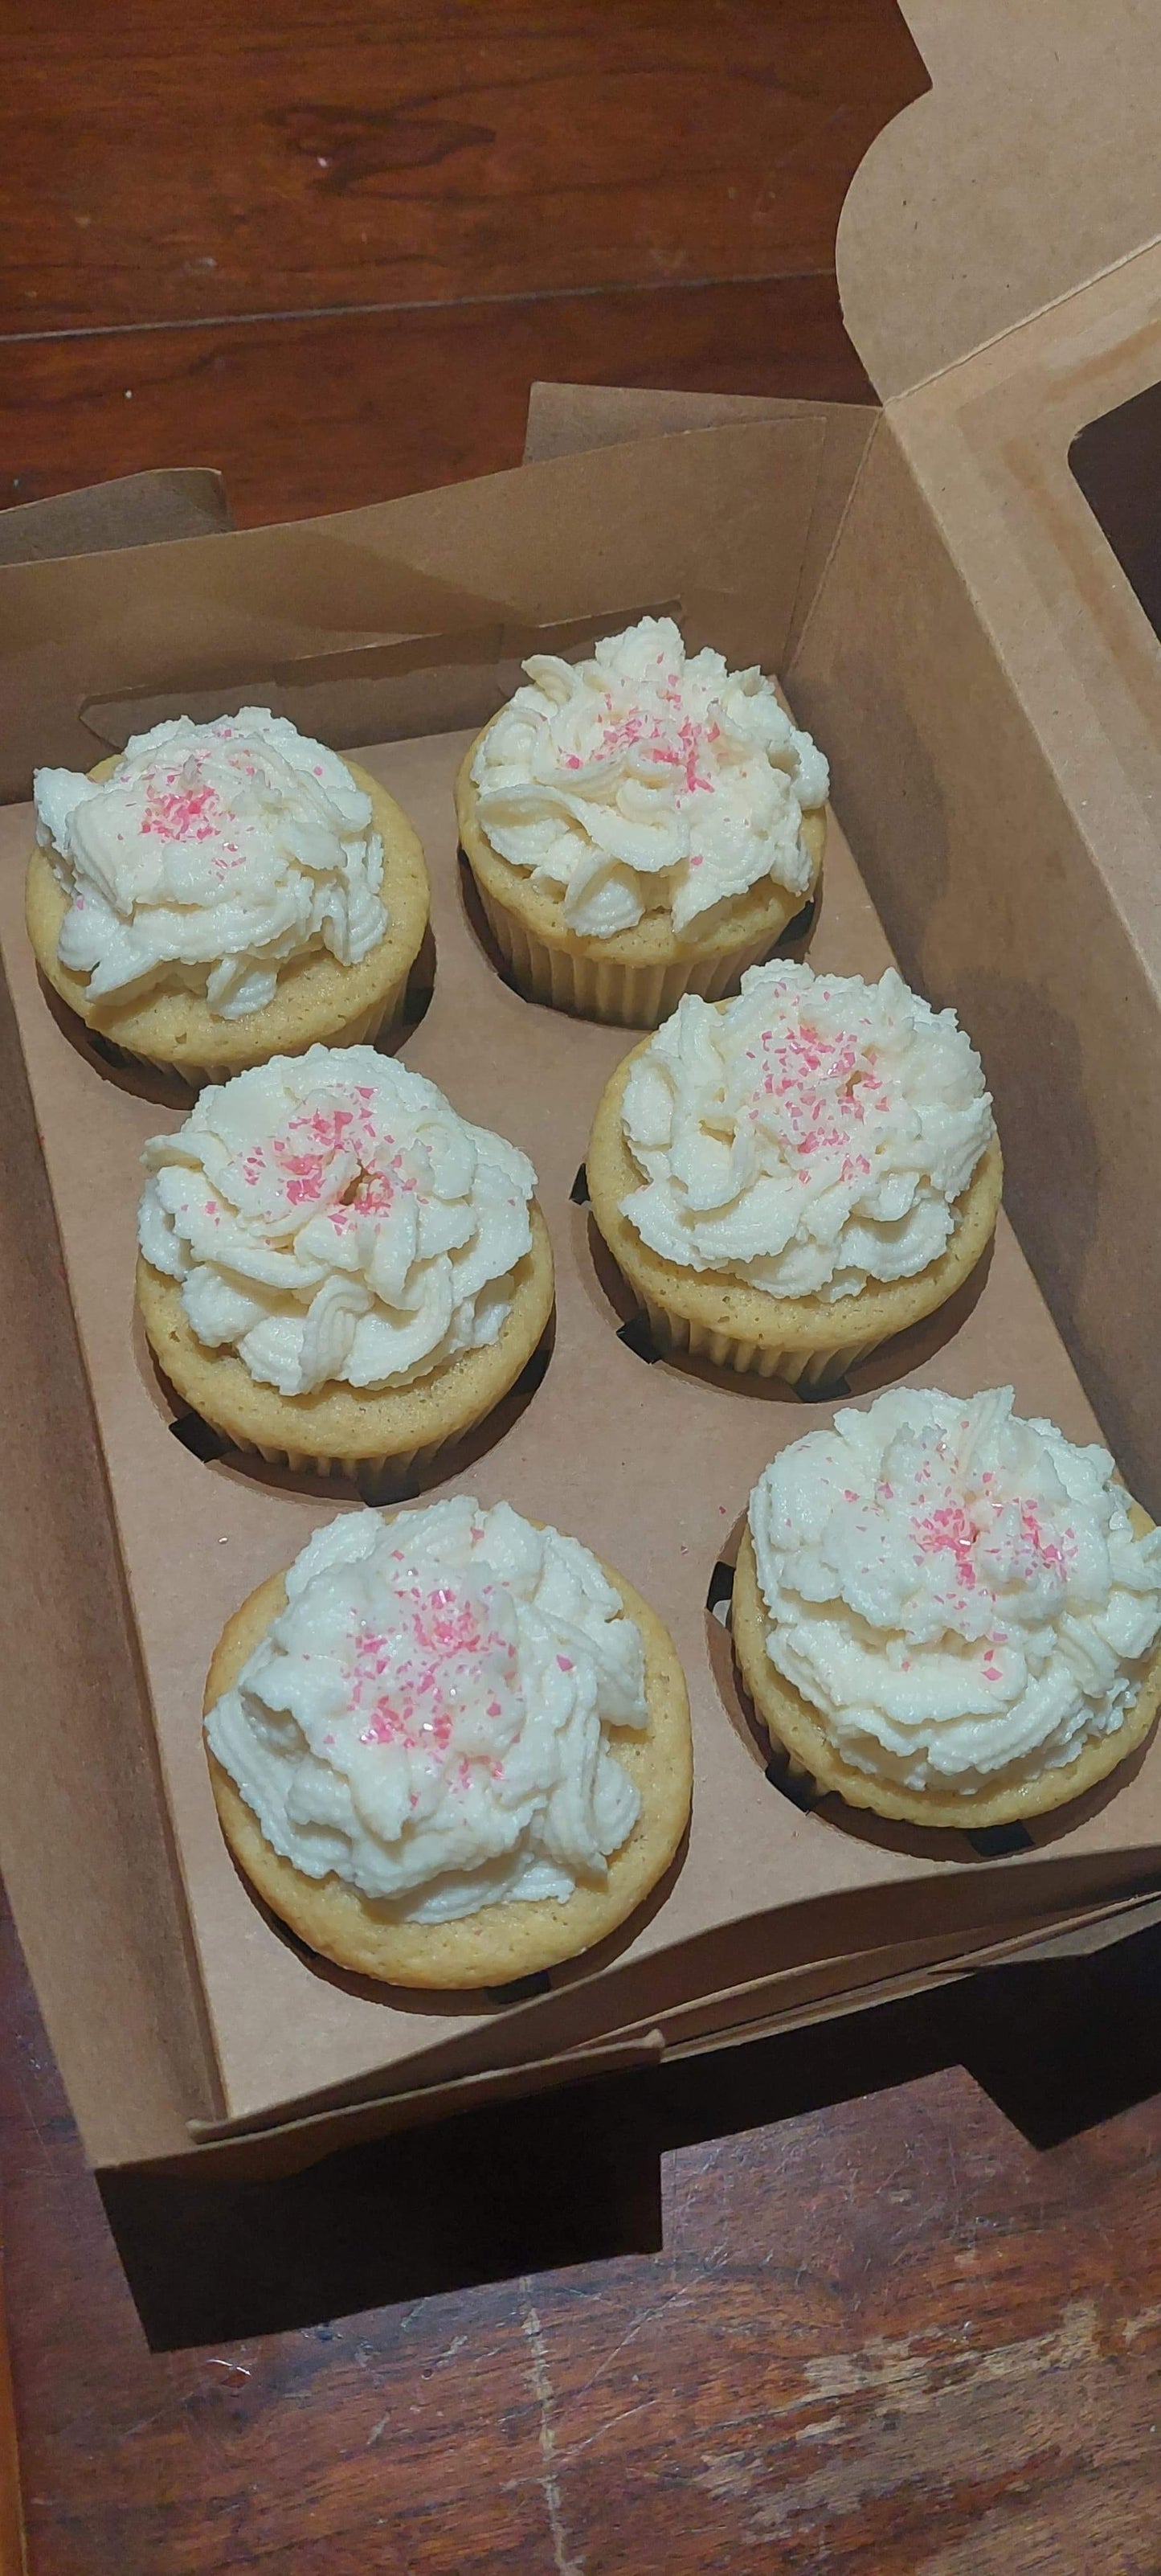 Cupcake Kit- plain cupcakes and a container of icing for shipping